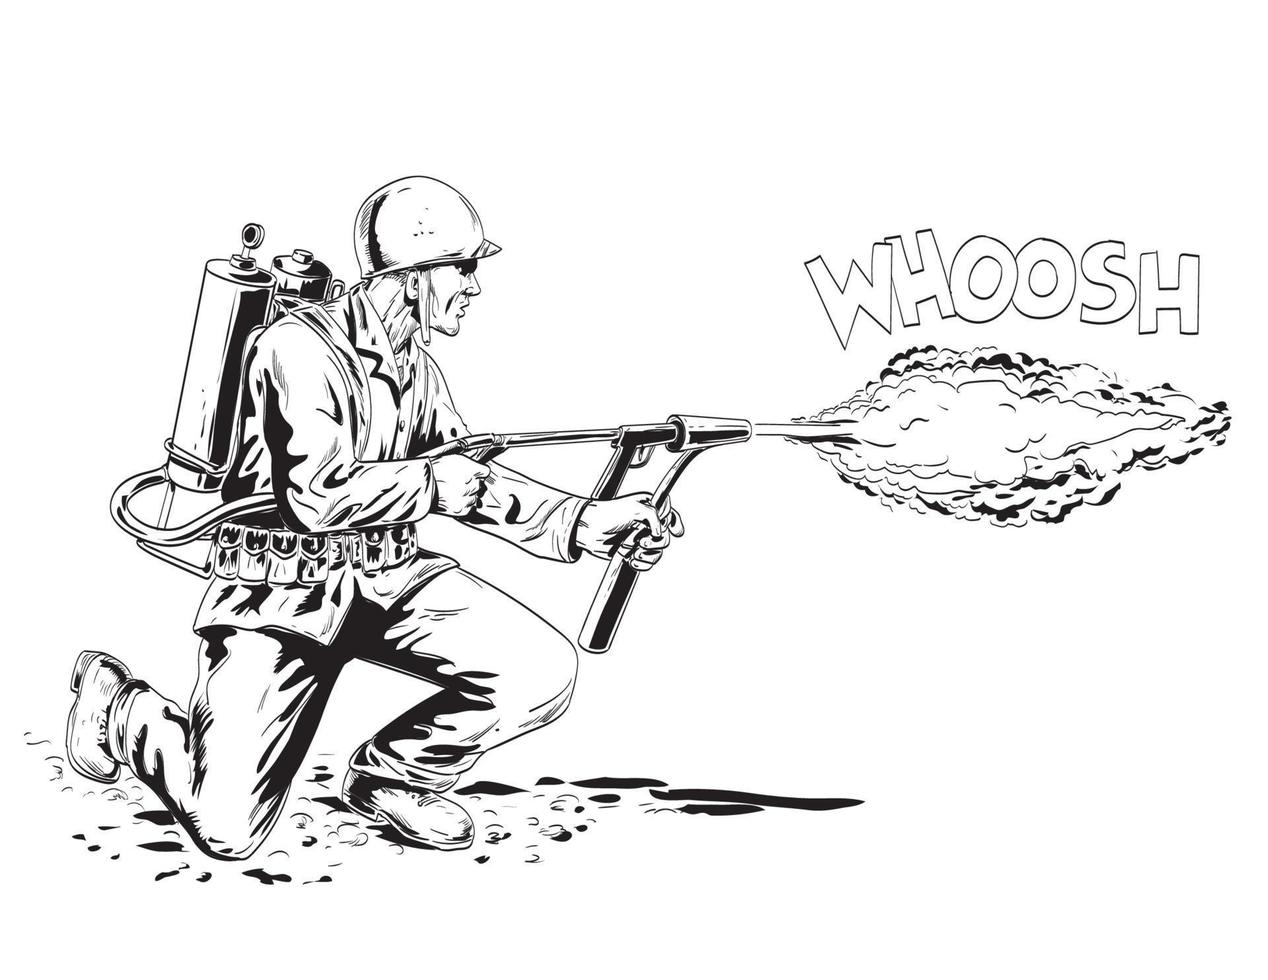 World War Two American Gi Soldier Firing Bazooka or Stovepipe Rocket Launcher Comics Style Drawing vector